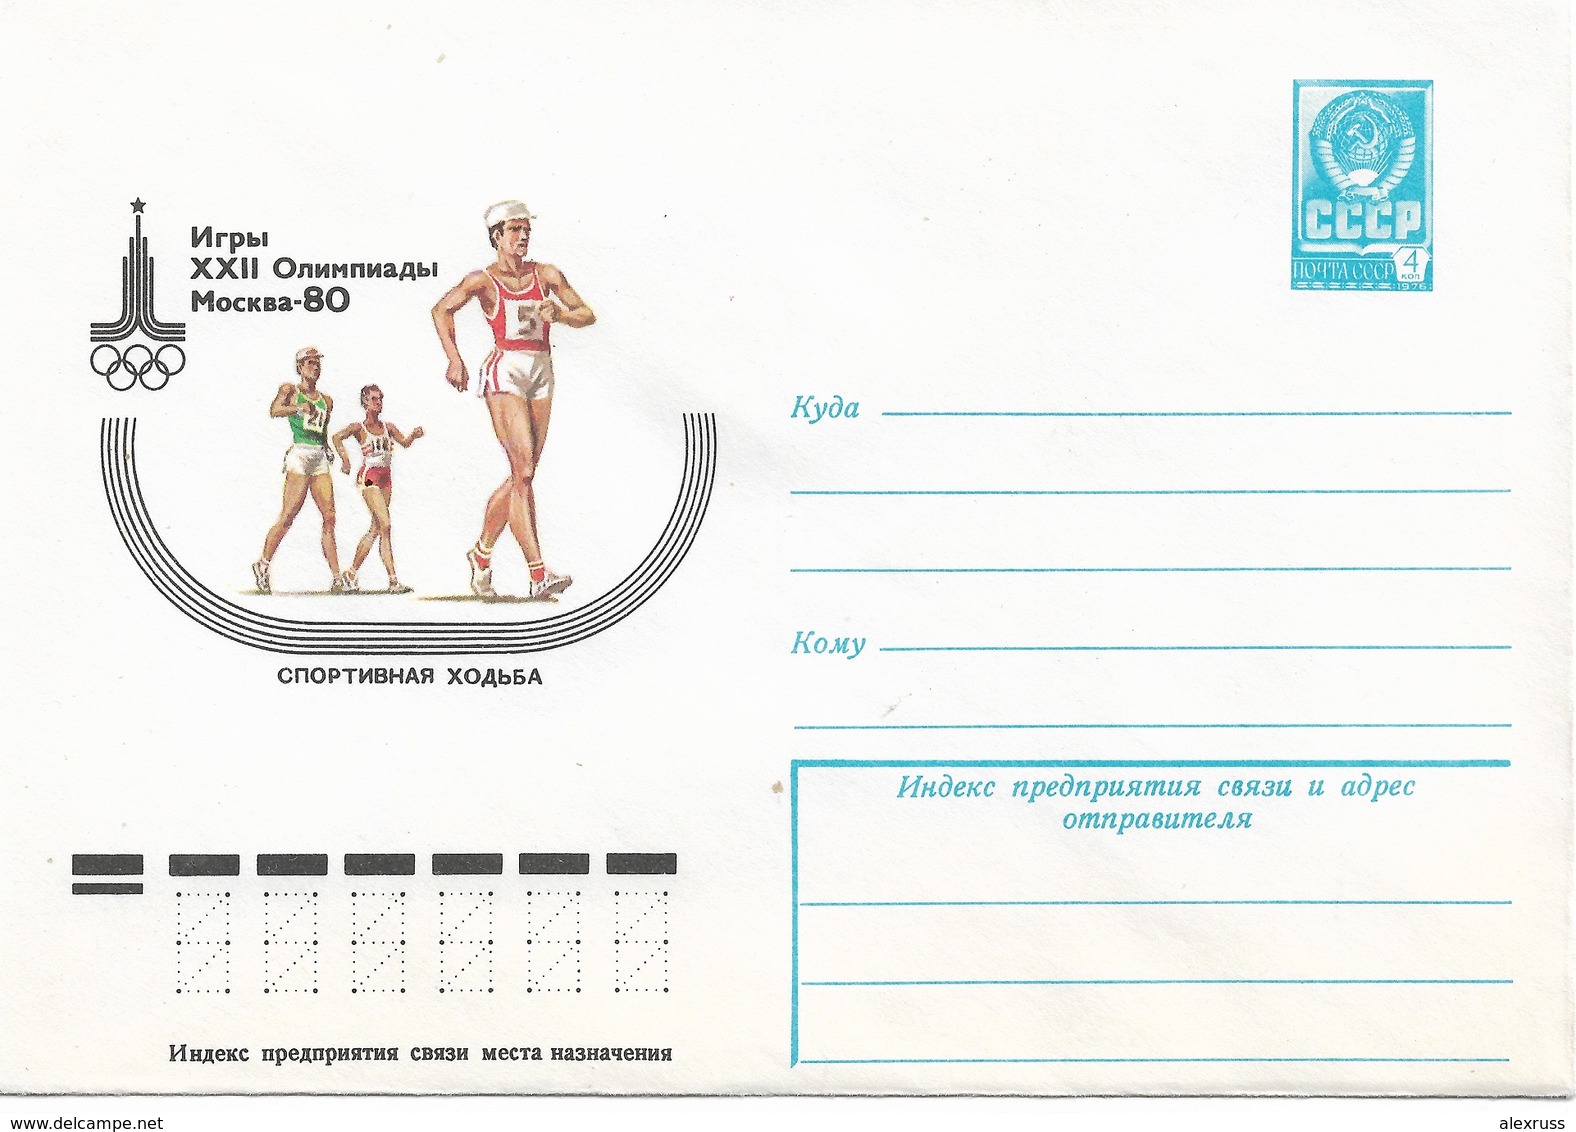 Russia/USSR 1980, 4 Covers Moscow Olympics, Athletics Running,VF Unused (RN50) - Covers & Documents